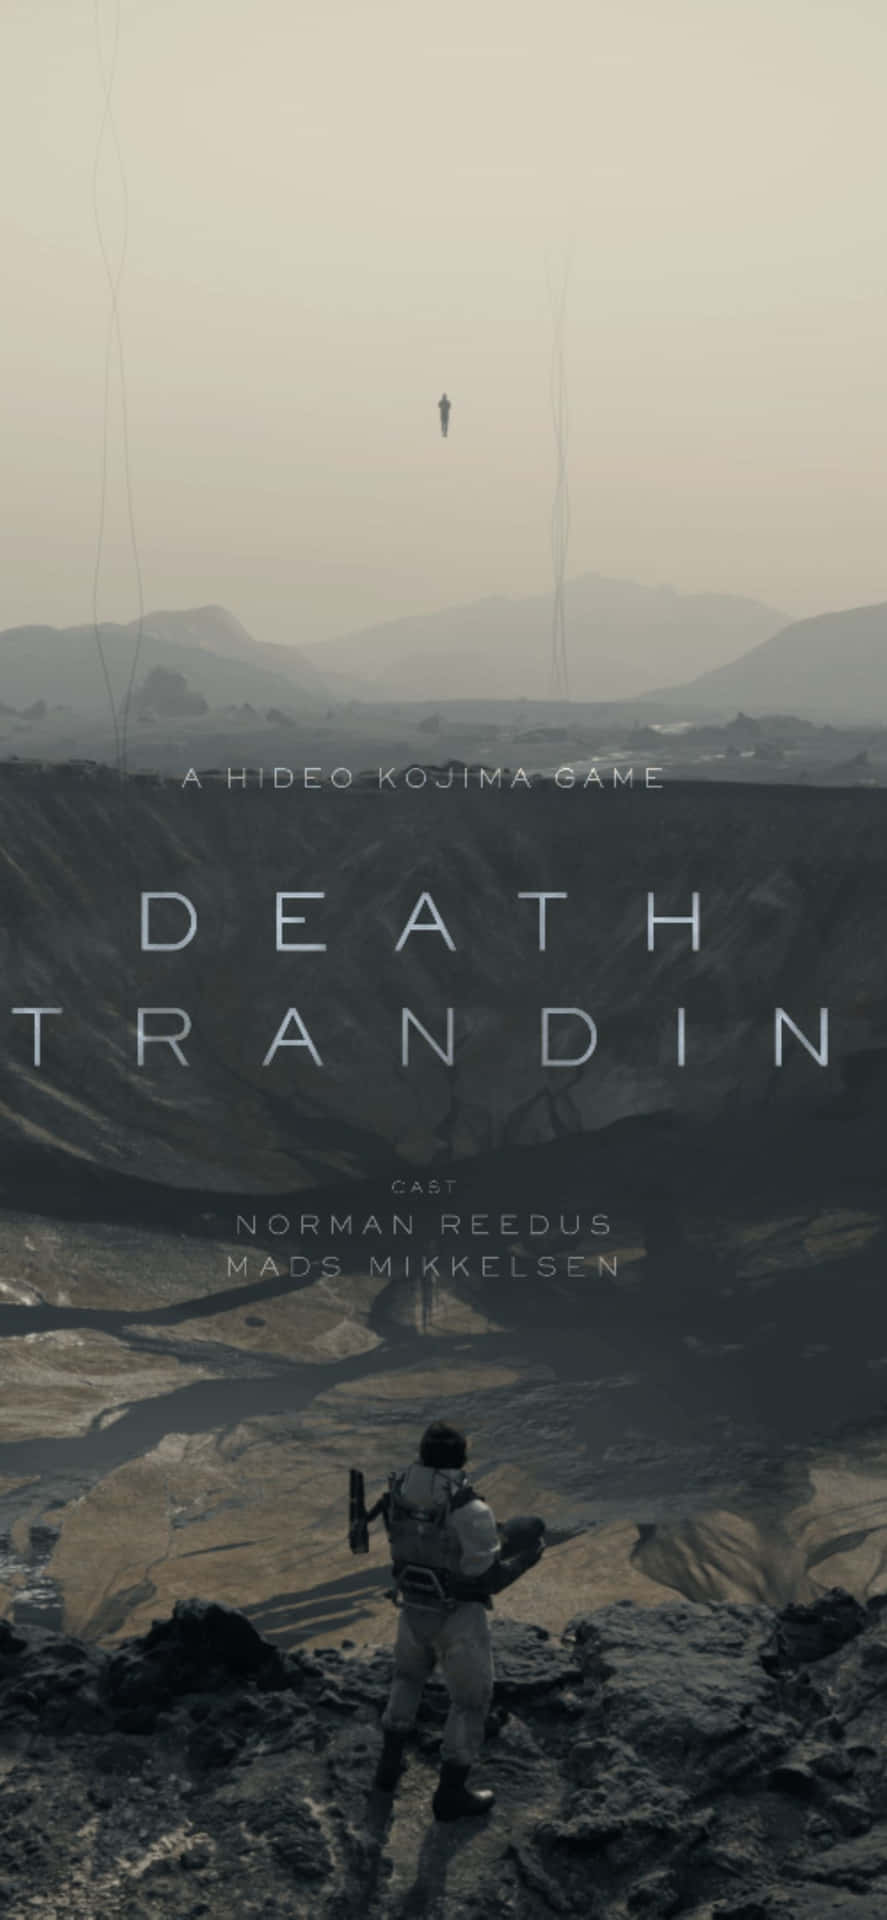 Experience the 8-hour cinematic epic of 'Death Stranding' on an iPhone Xs Max